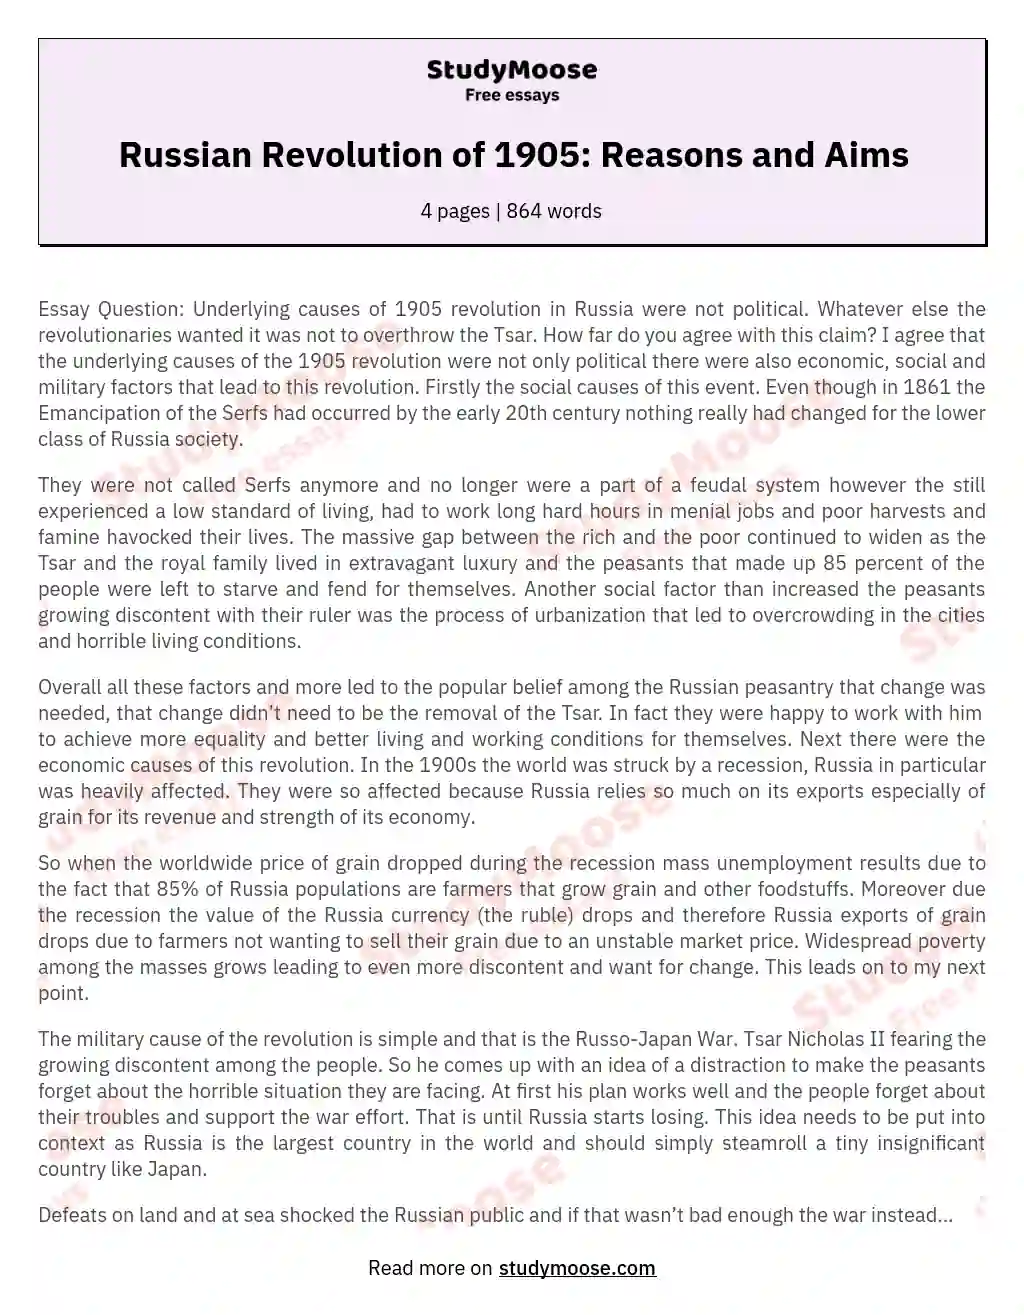 Russian Revolution of 1905: Reasons and Aims essay